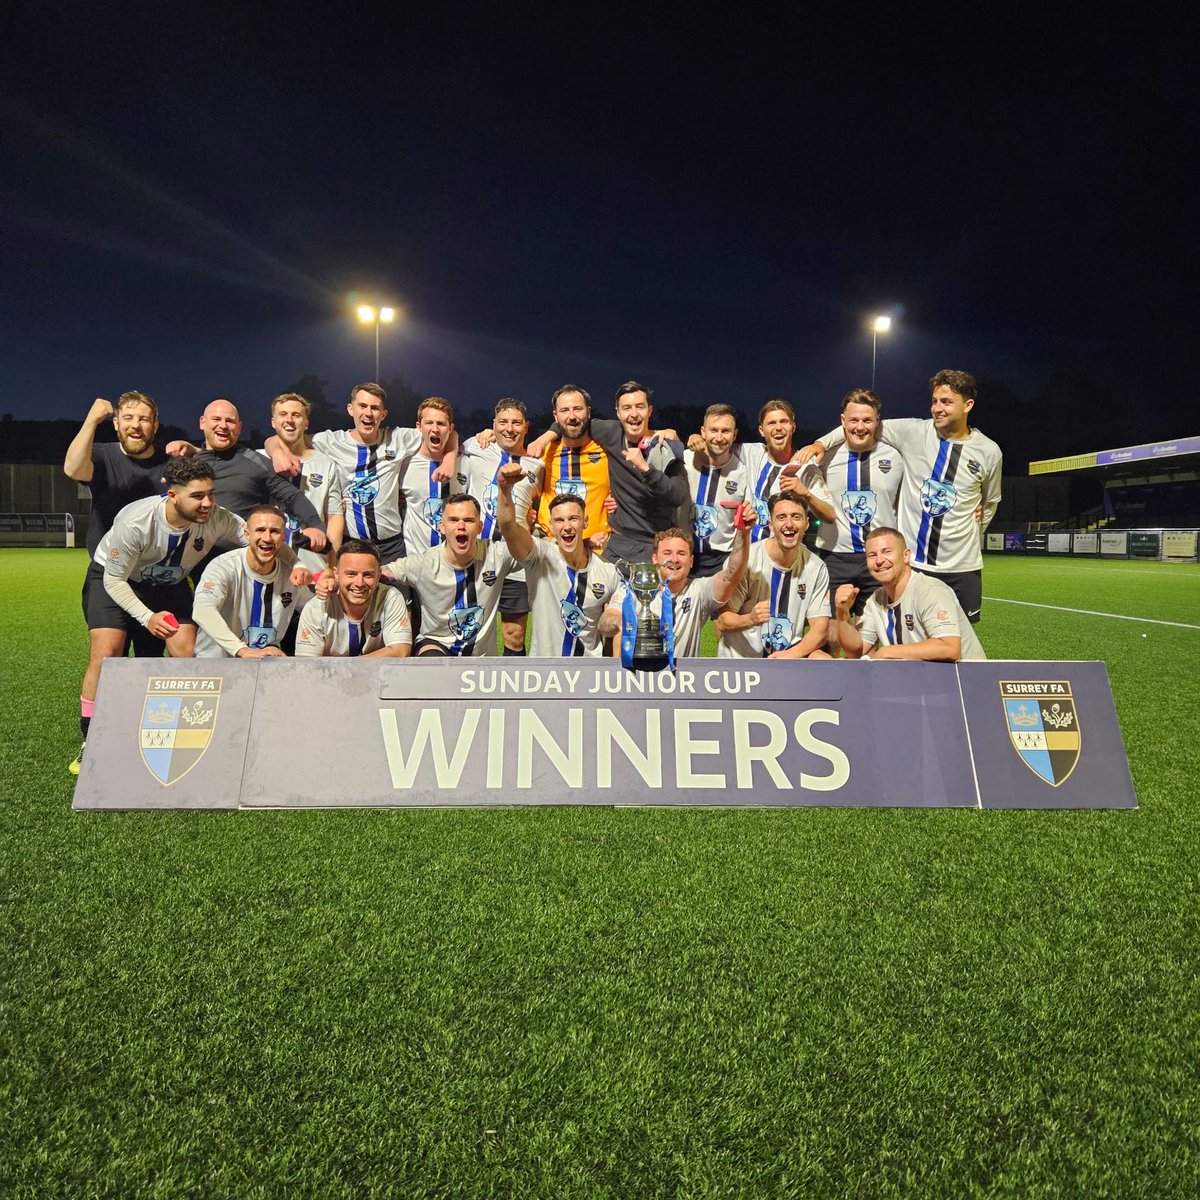 Congratulations to Overtonians FC who beat Rickman Rovers in the Sunday Junior Cup Final on penalties after the game finished 2-2 #SurreyFootball #CountyCups #Finals #Penalties